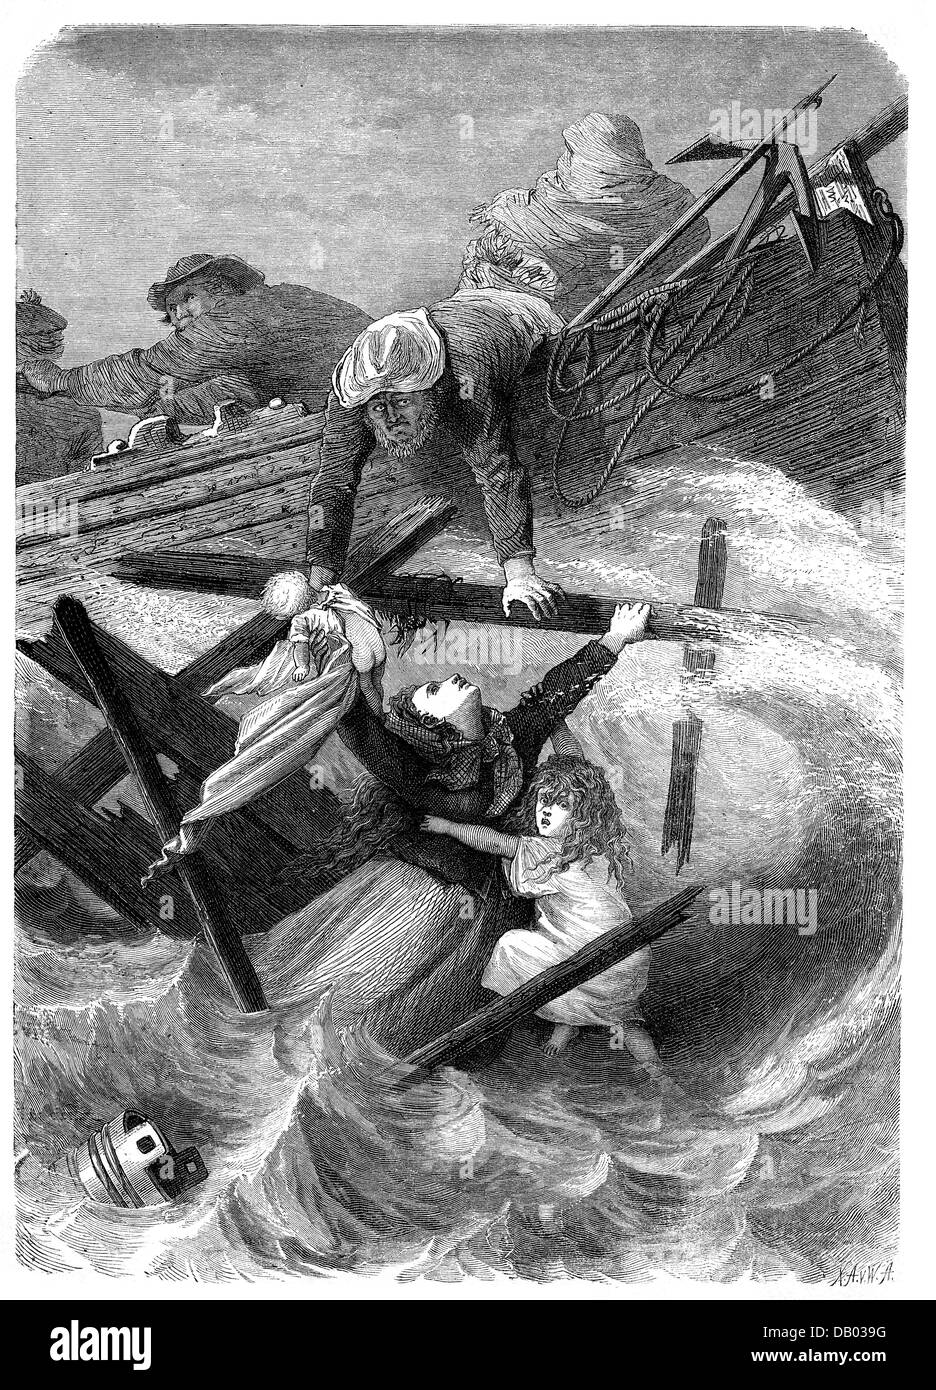 transport / transportation, navigation, disasters, sailors rescue a mother and her child, 'In the last moment', after a motif from the island of Falster, Denmark, wood engraving after drawing by E. Knutsen, published in 'Die Gartenlaube', 1873, Additional-Rights-Clearences-Not Available Stock Photo